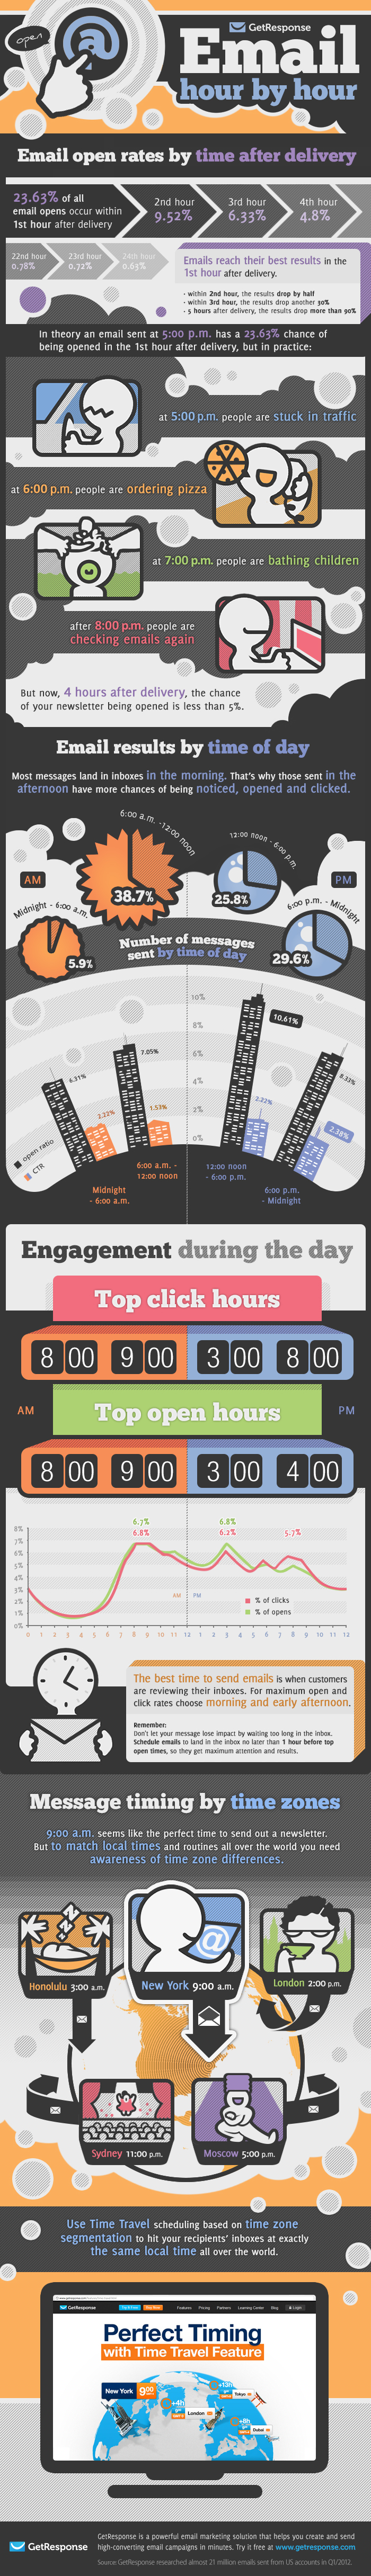 Infographic - Email Opens By Daypart